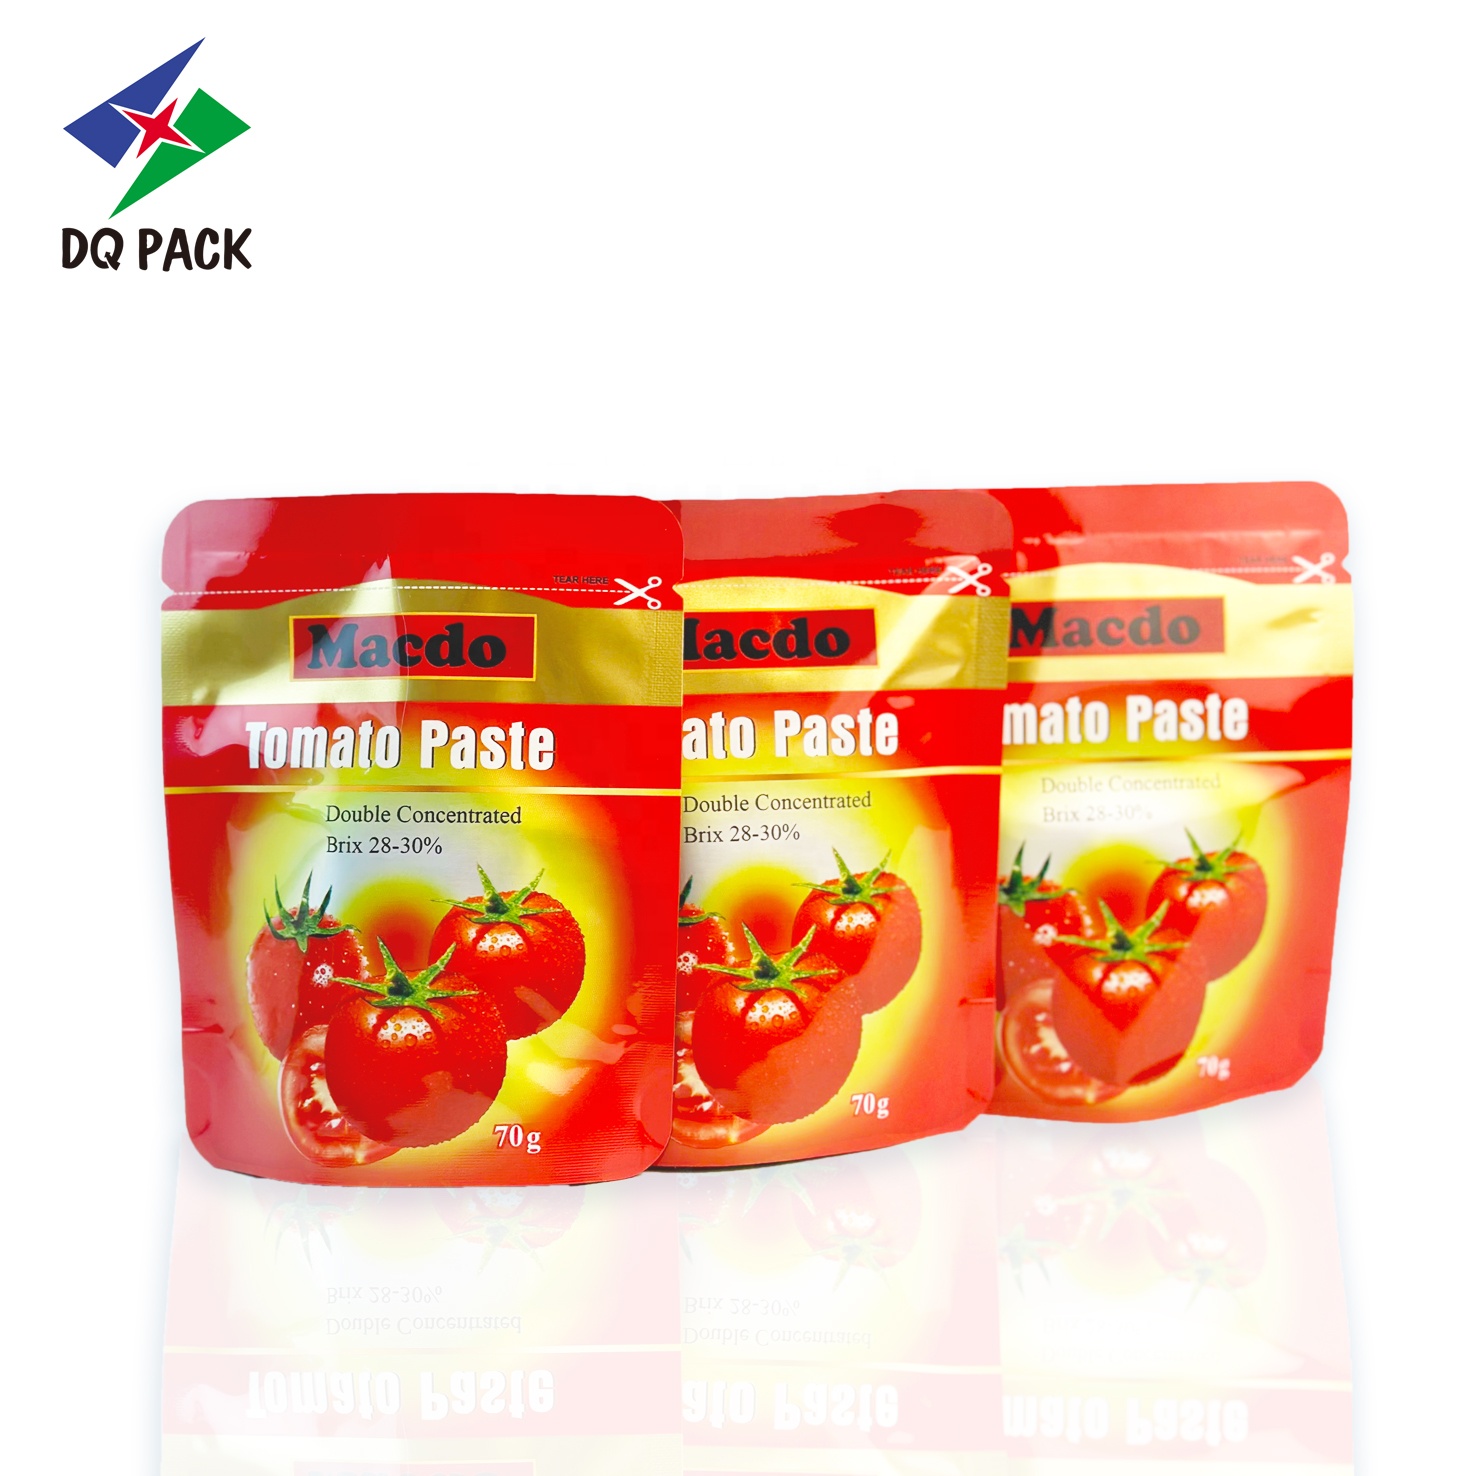 DQ PACK Factory 70g 150g 200g Tomato Sauce Plastic Packaging Bag Ketchup Stand Up Heat Seal Bag